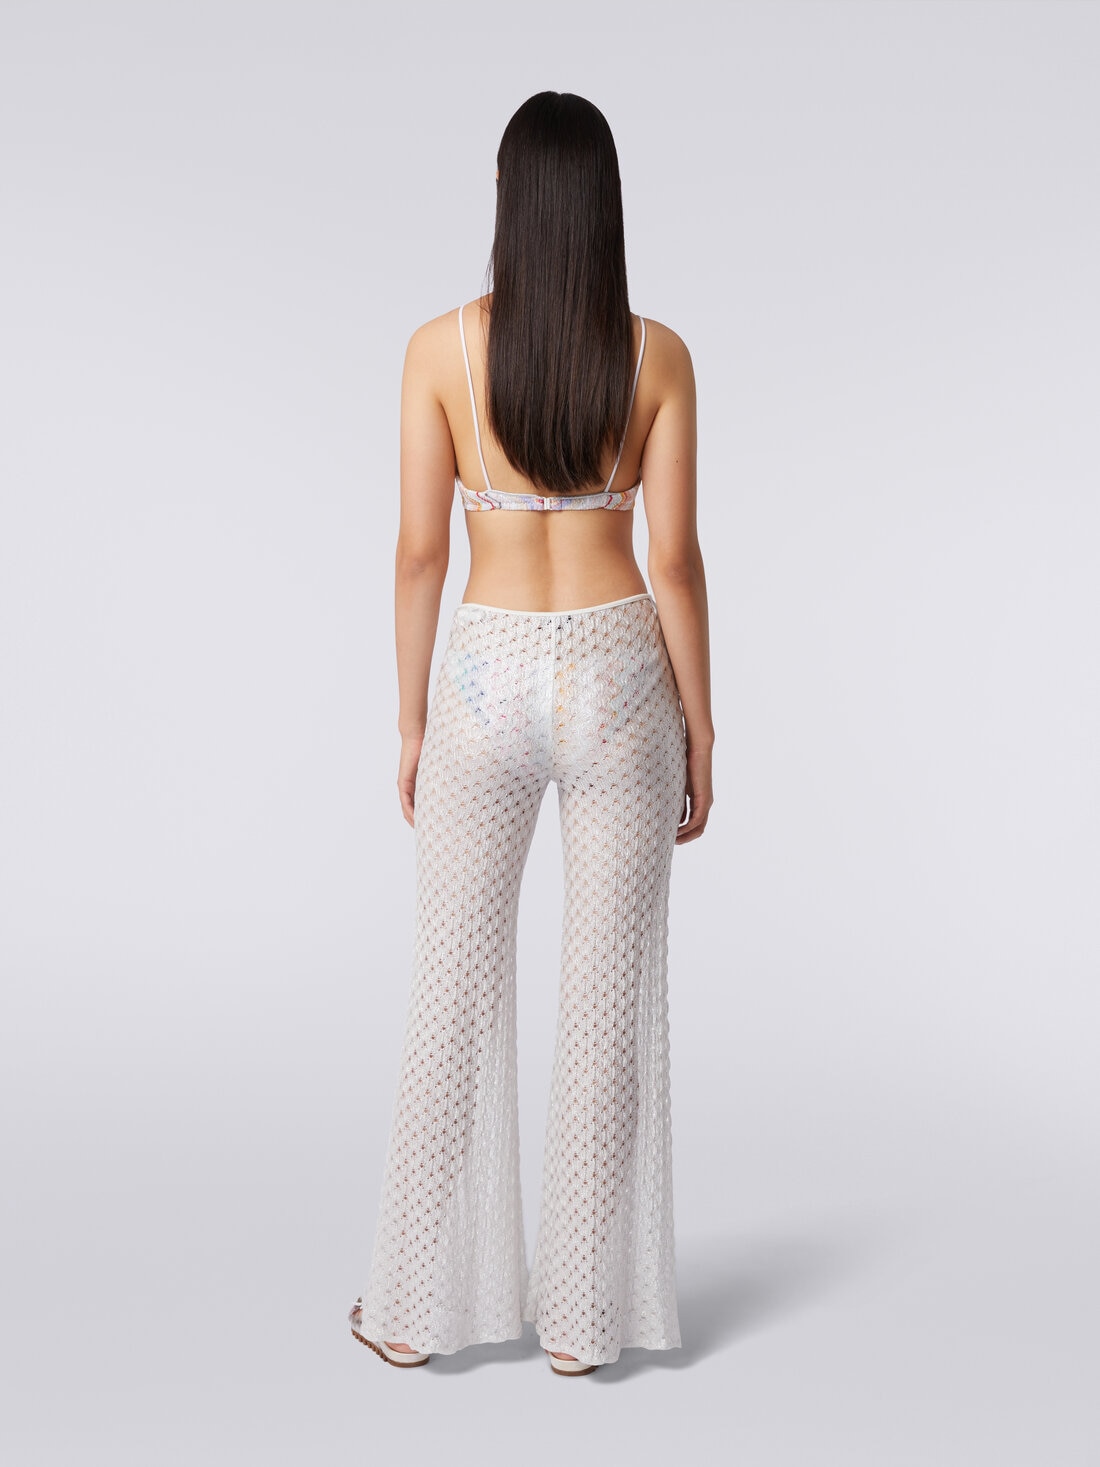 Lace-effect cover up trousers with flared hem, White  - MS24SI00BR00TC14001 - 3